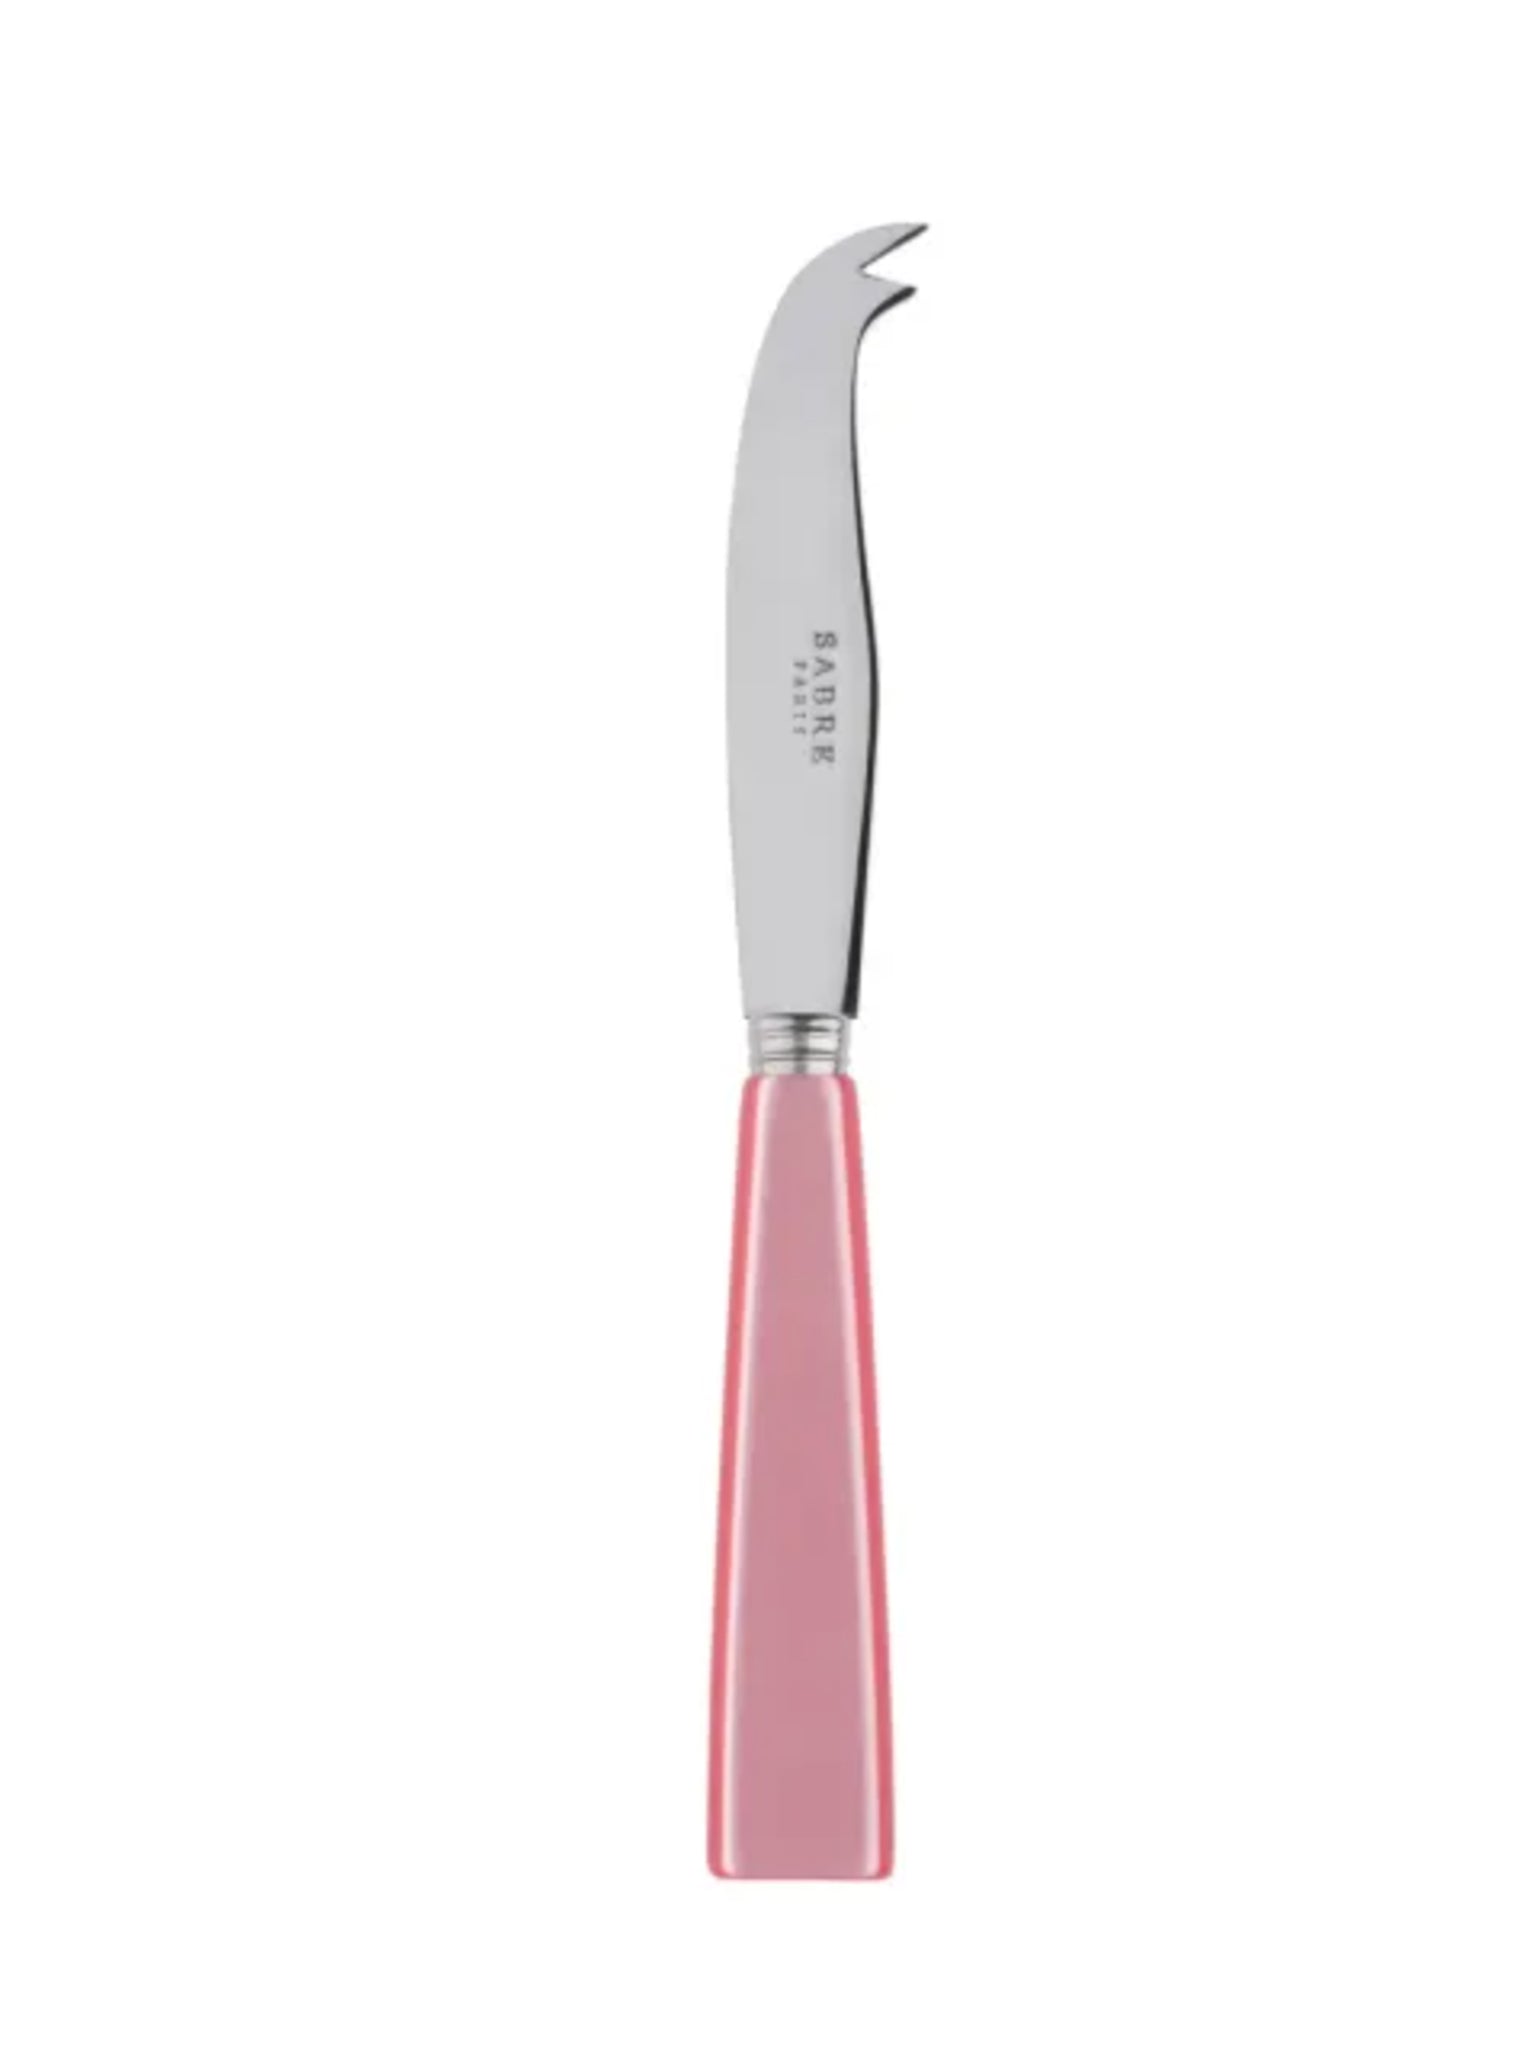 Sabre Paris Icone Small Pink Cheese Knife Weston Table